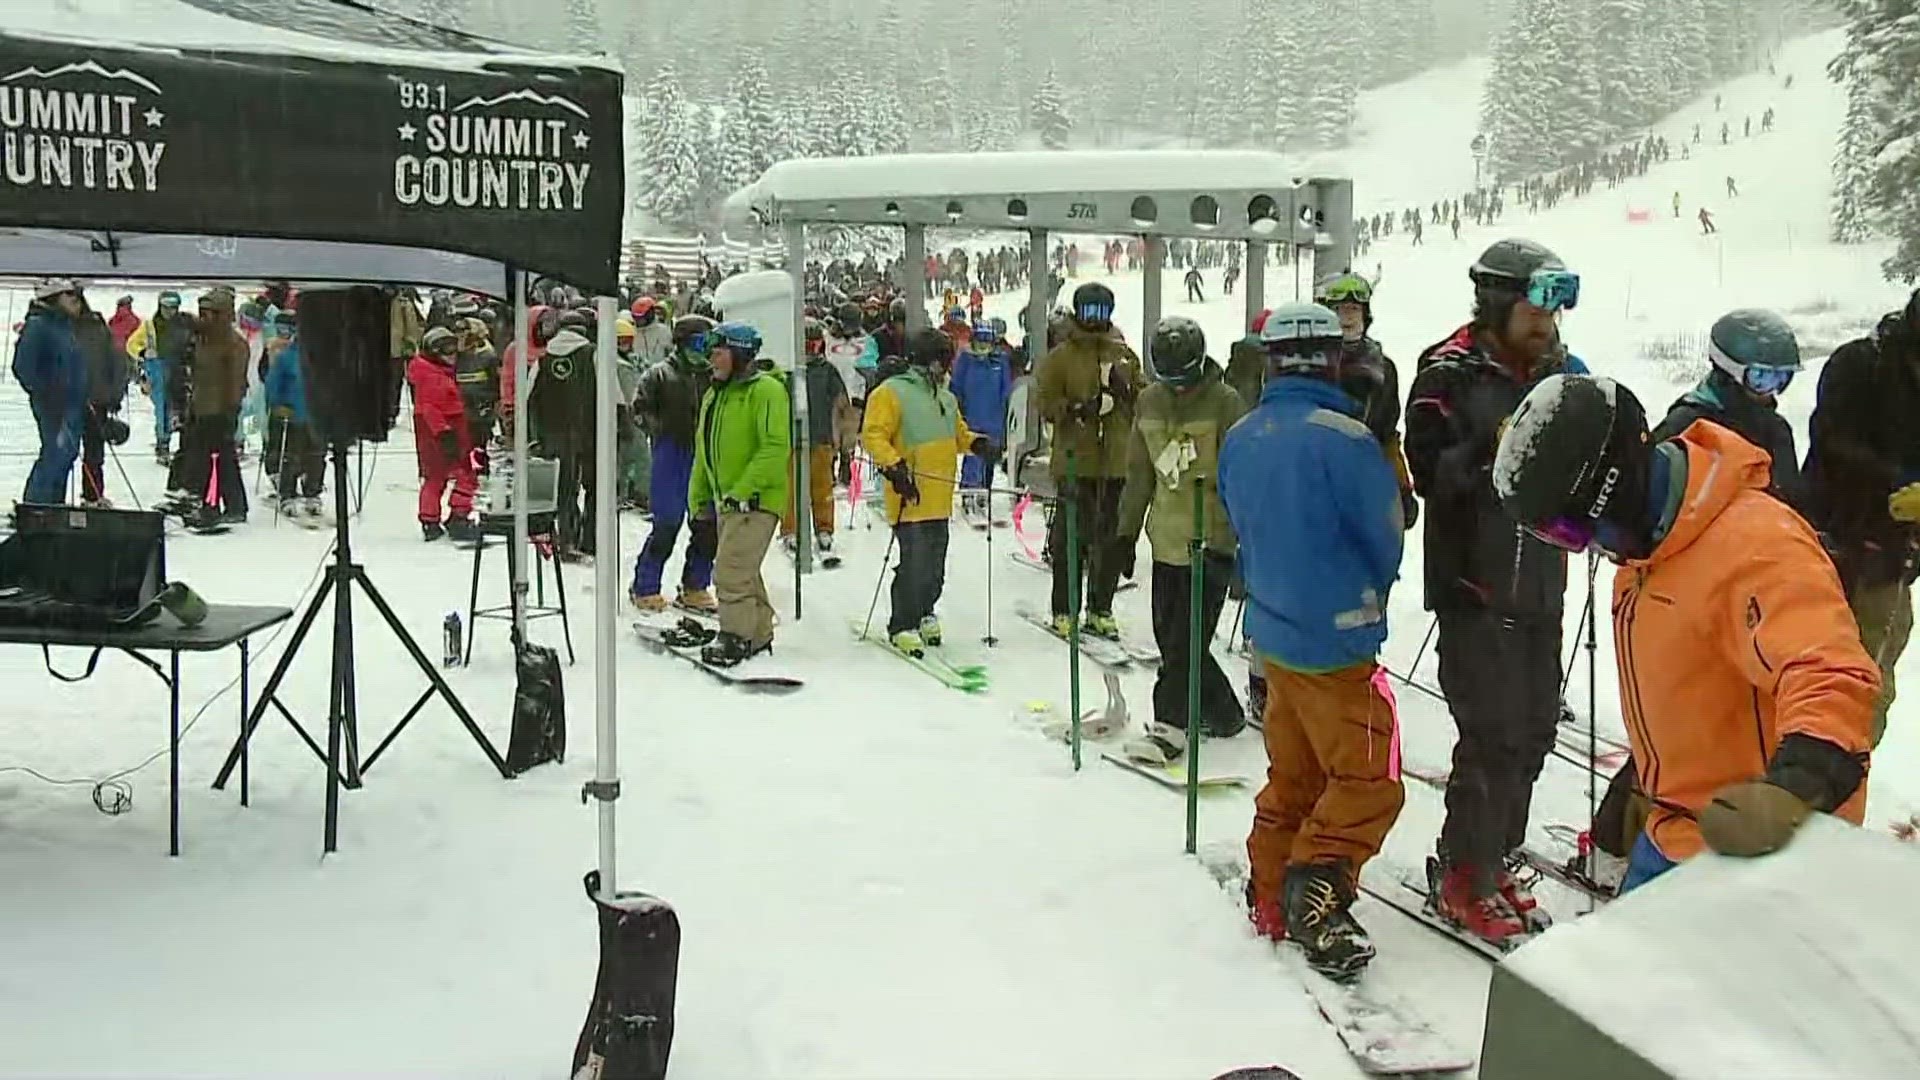 Matt Renoux reports live from A Basin on Sunday, Oct. 29 as the first skiers and snowboards of the Colorado season hit the slopes.